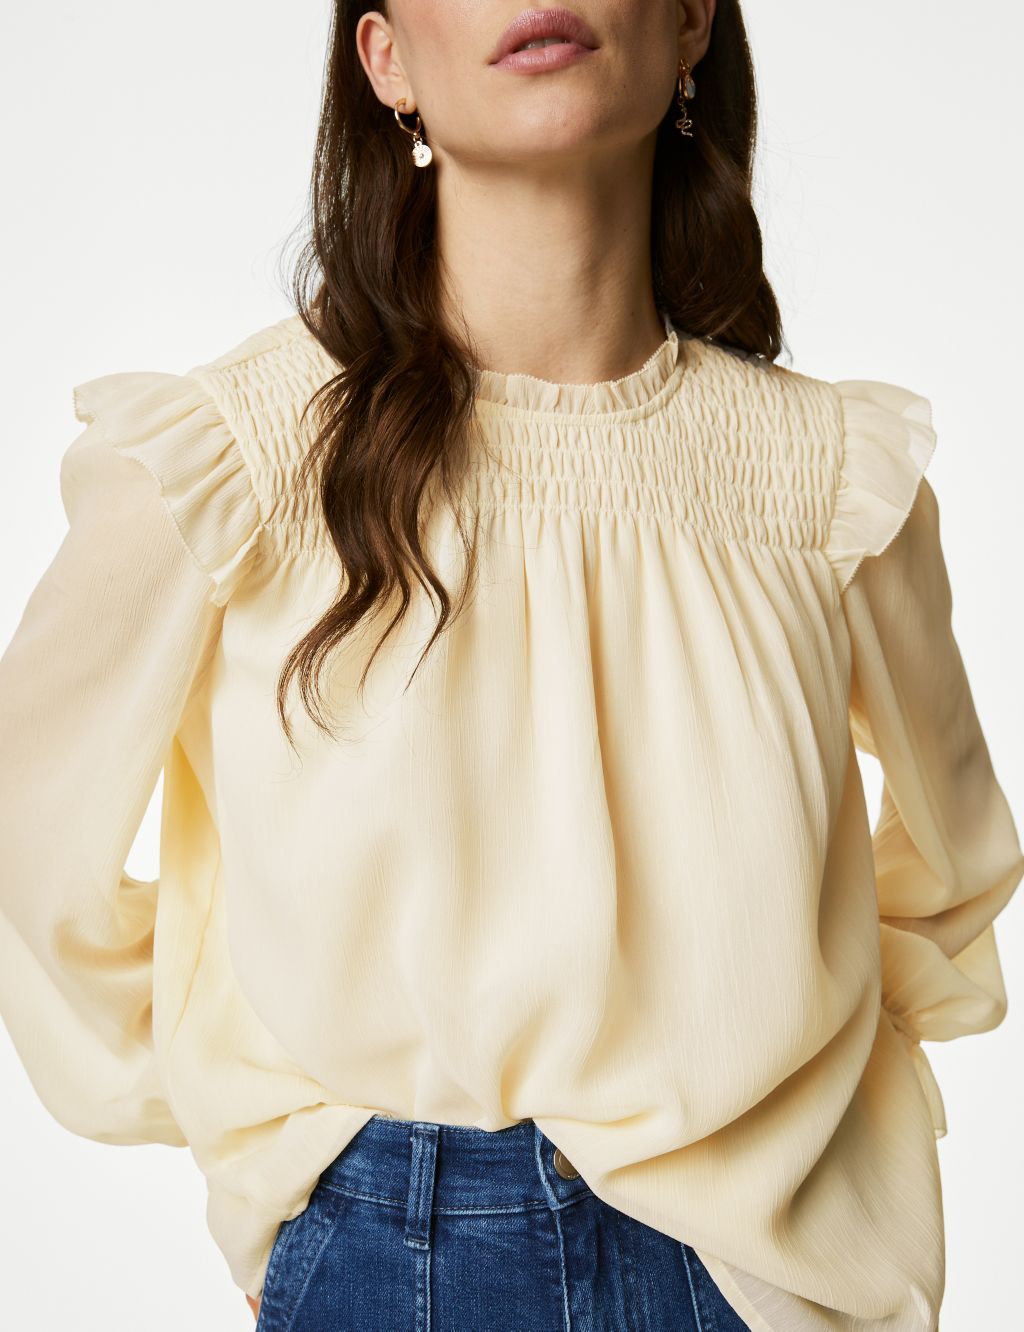 Shirred High Neck Frill Detail Blouse image 3